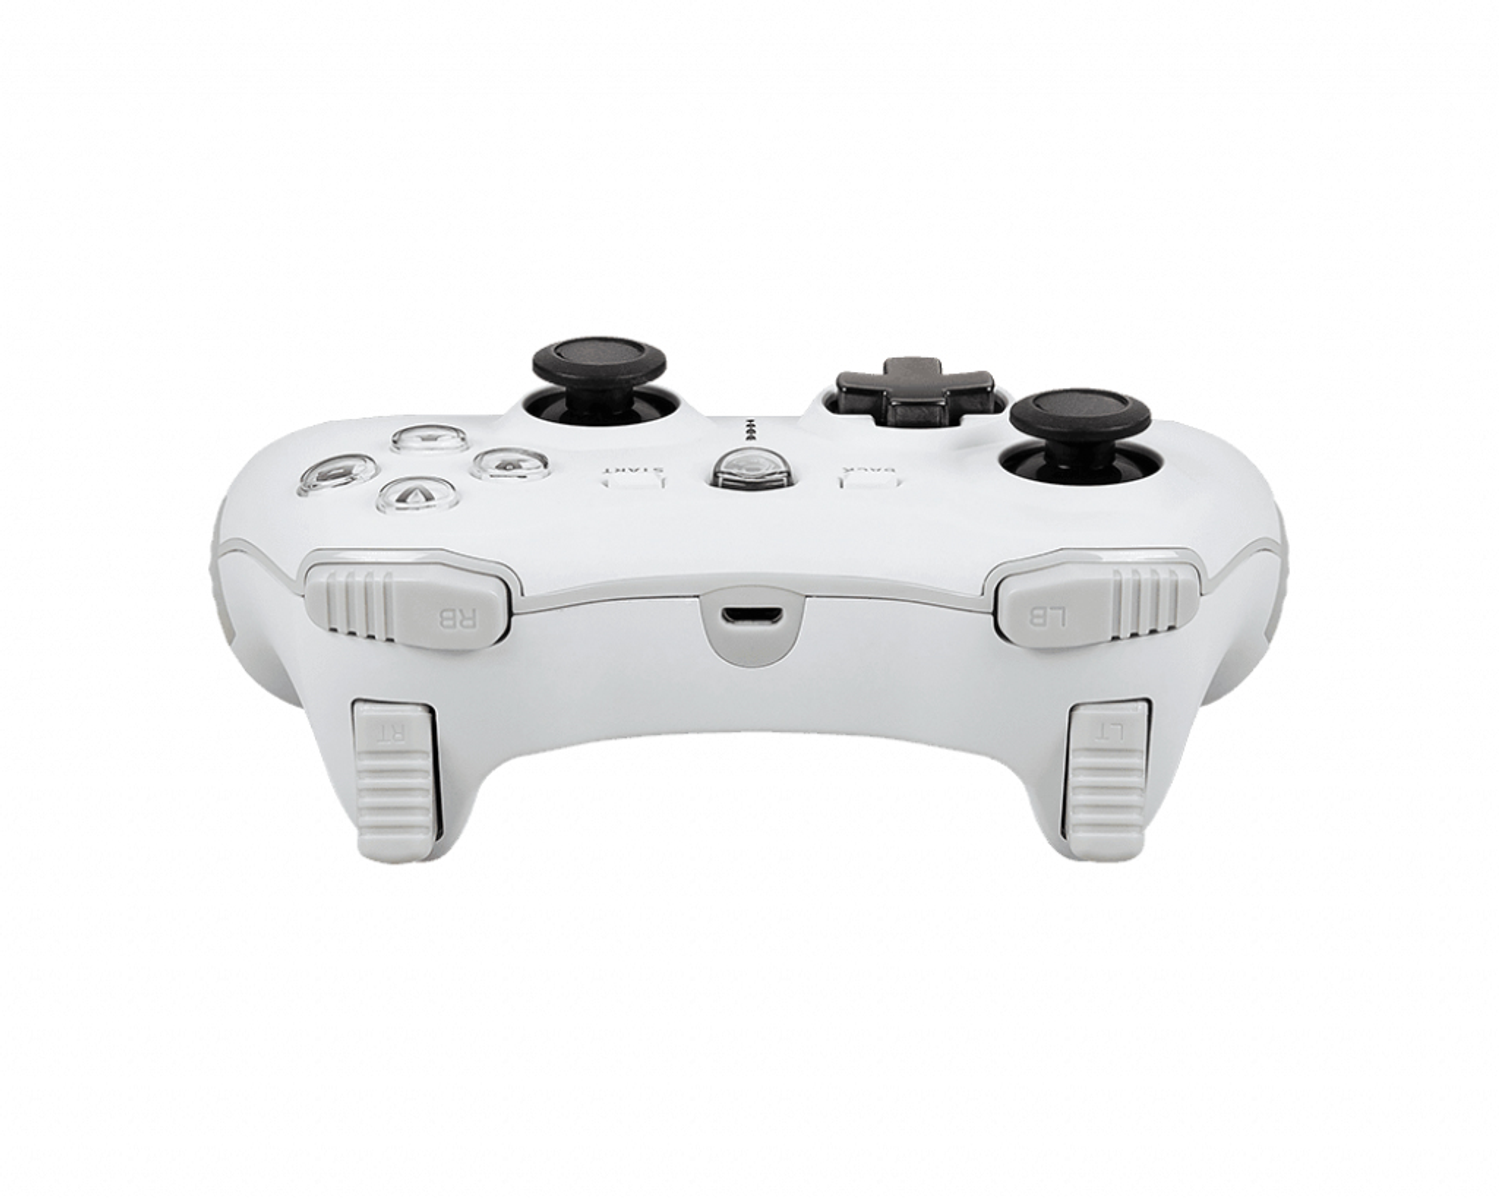 Weiß Game Controller FORCE CONTROLLER S10-04G0020-EC4 MSI GC20 V2 GAME